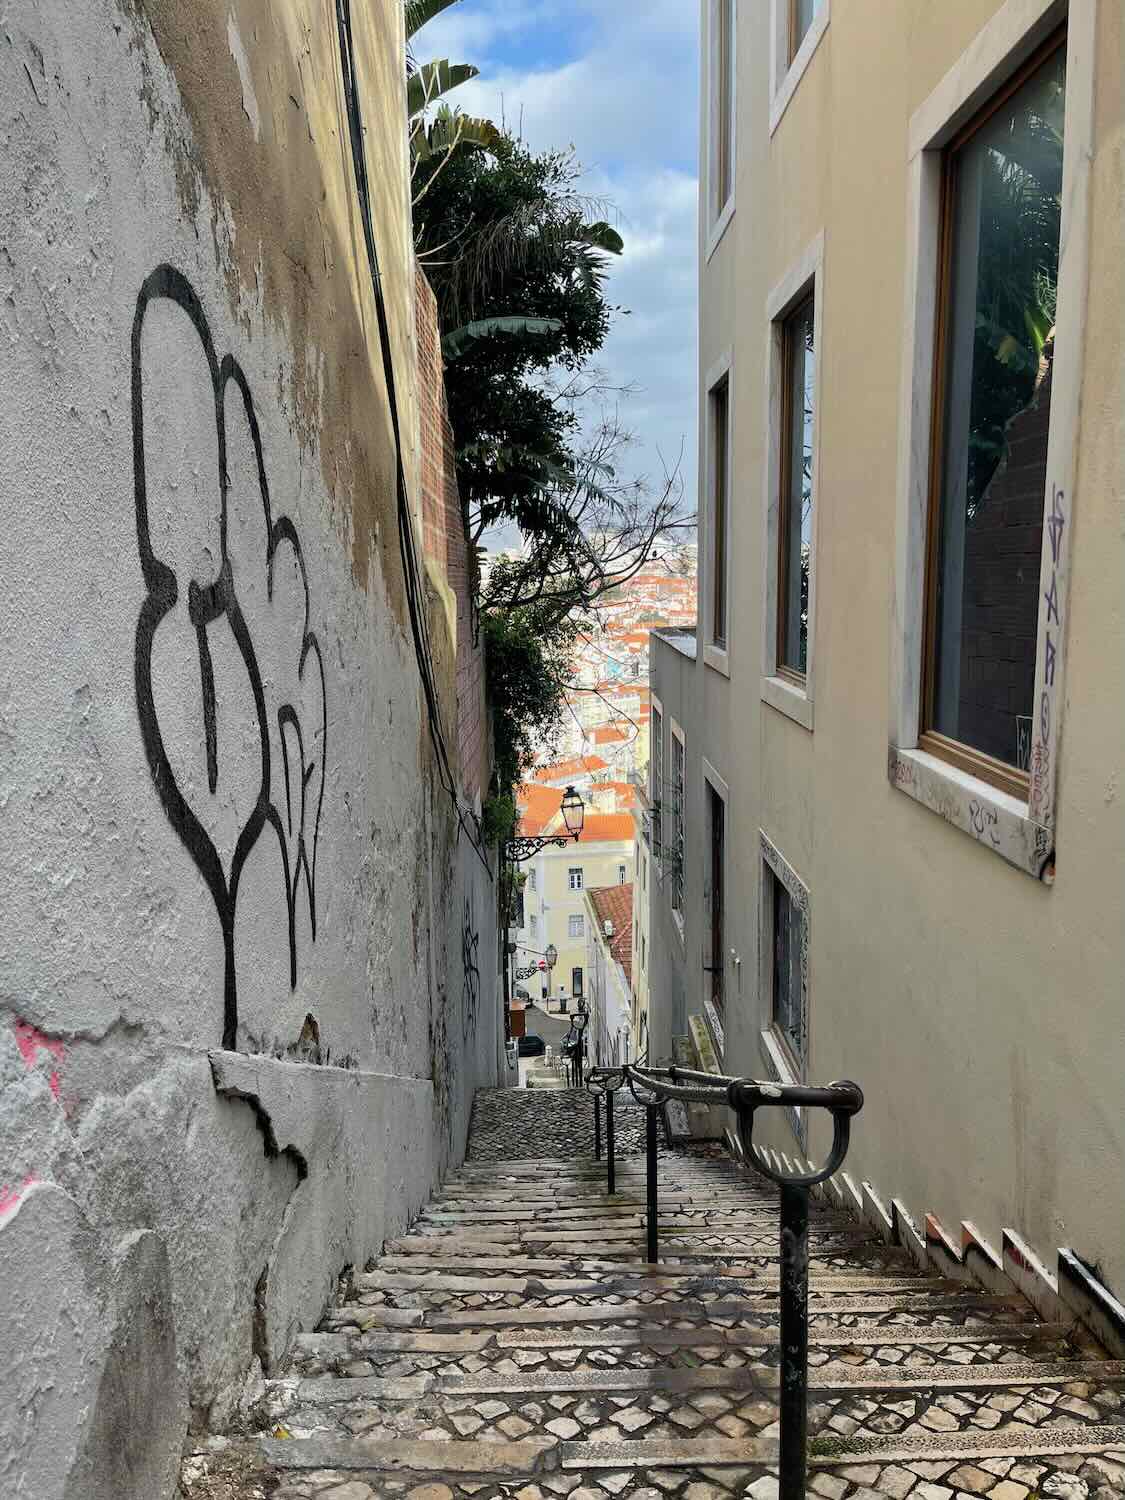 A narrow and steep stairway in Lisbon's old town, flanked by old walls with graffiti, leading down to a picturesque, quiet street.